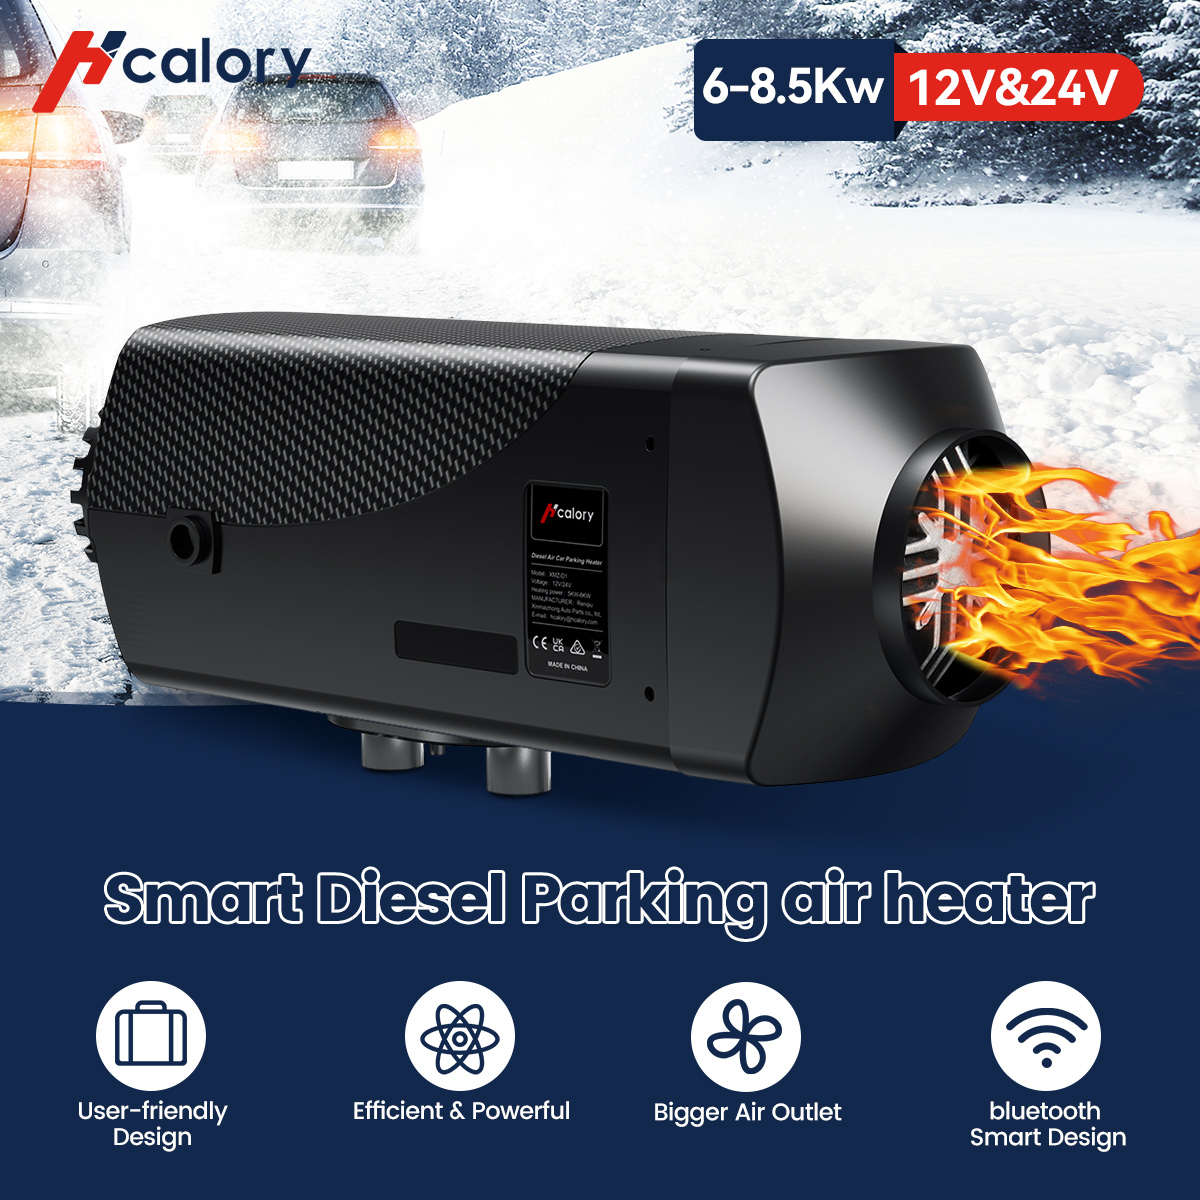 Hcalory 12V&24V 6-8.5KW Car Parking Diesel Air Heater 10L Tank LCD Screen  bluetooth APP Remote Control Voice Broadcast